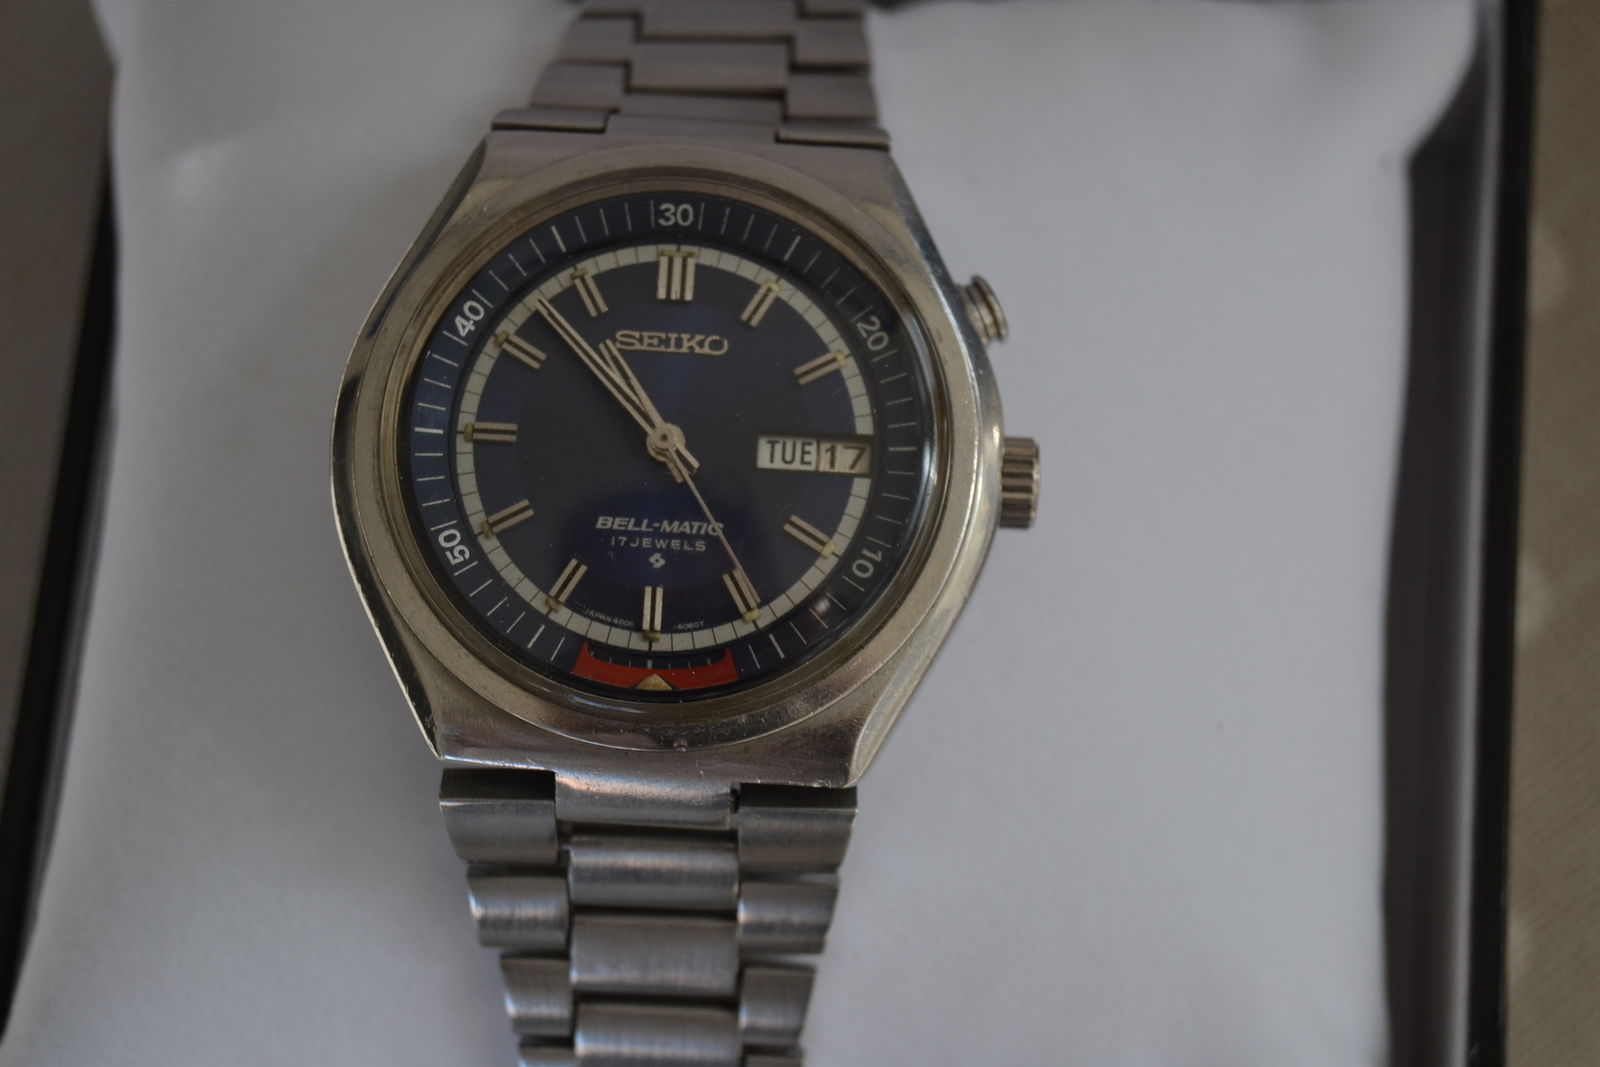 Seiko Bell Matic 4006-6040 | Omega Forums